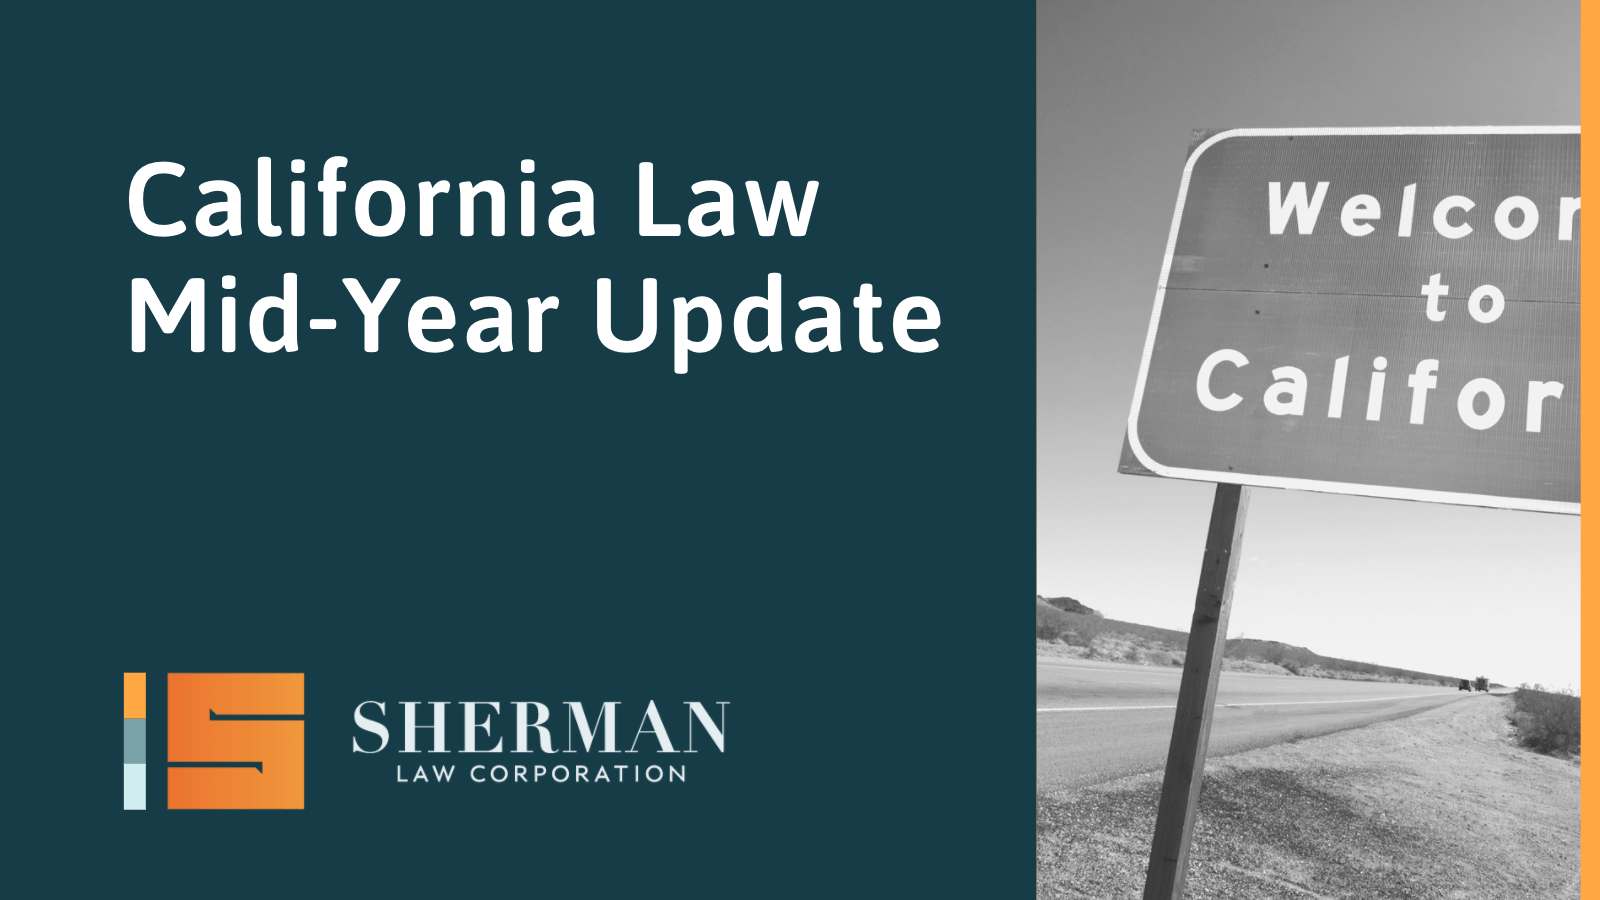 California Law Mid-Year Update - sherman law corporation